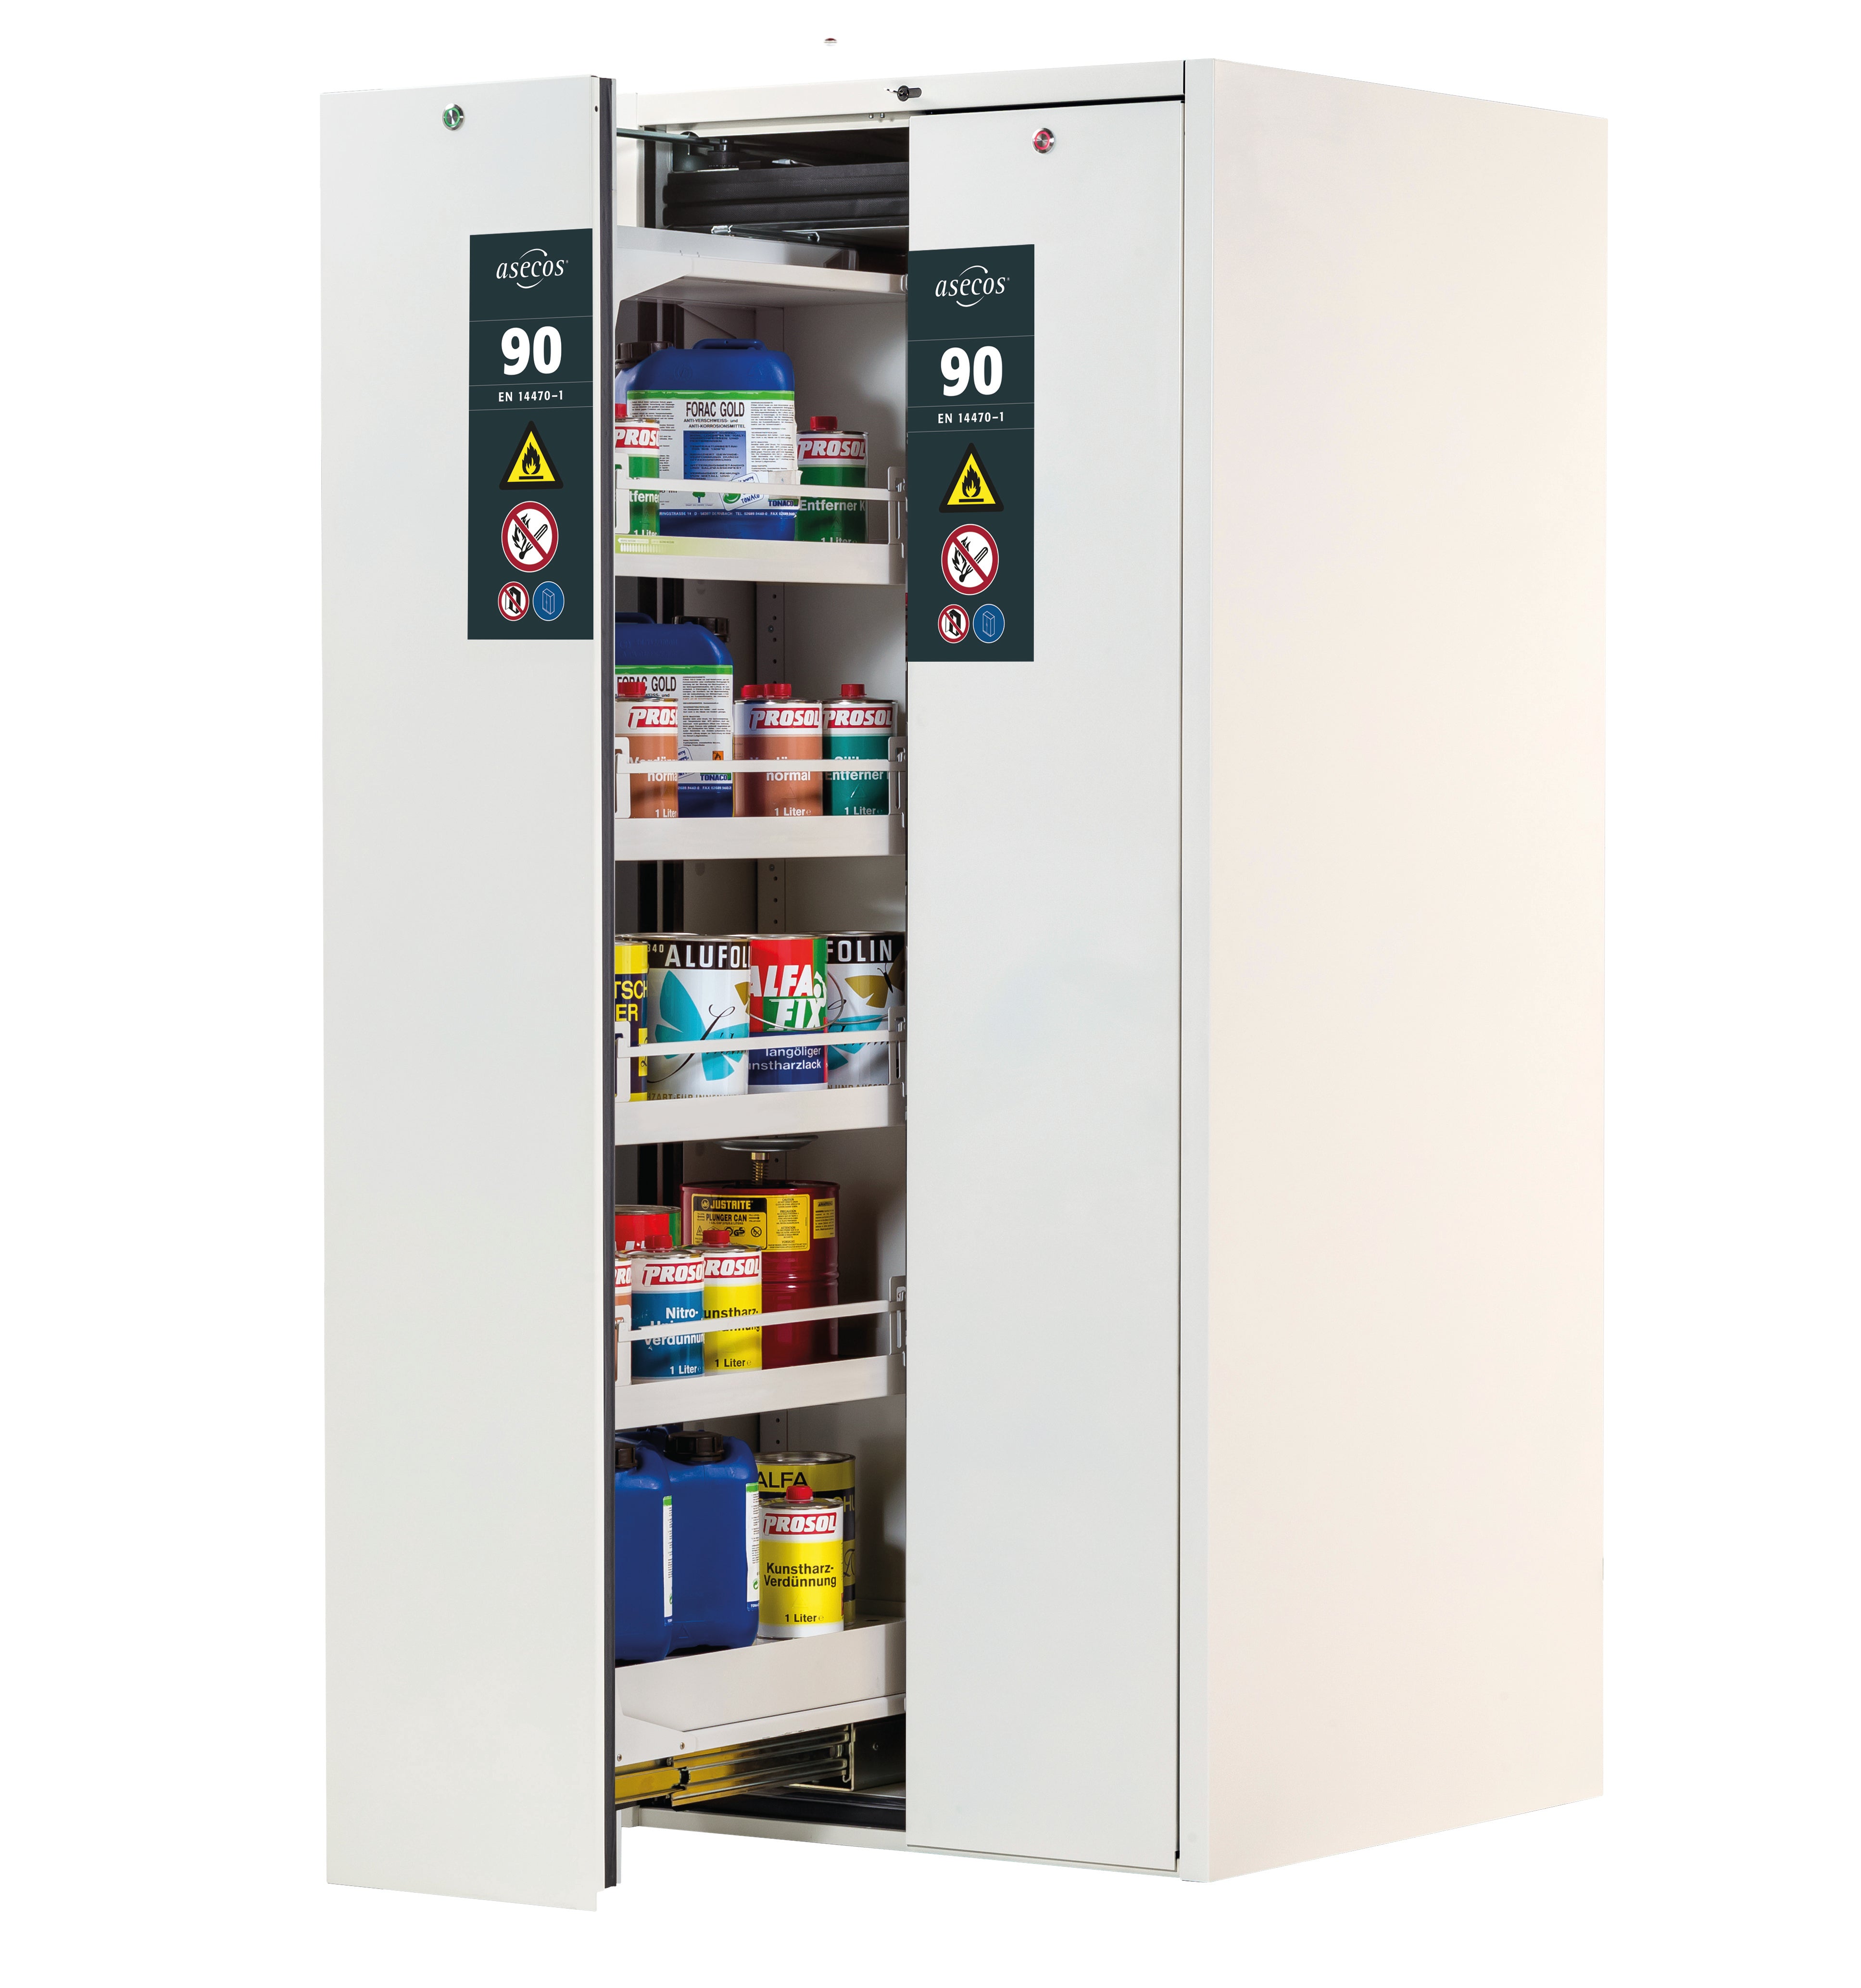 Type 90 safety cabinet V-MOVE-90 model V90.196.081.VDAC:0012 in laboratory white (similar to RAL 9016) with 4x standard tray base (sheet steel)